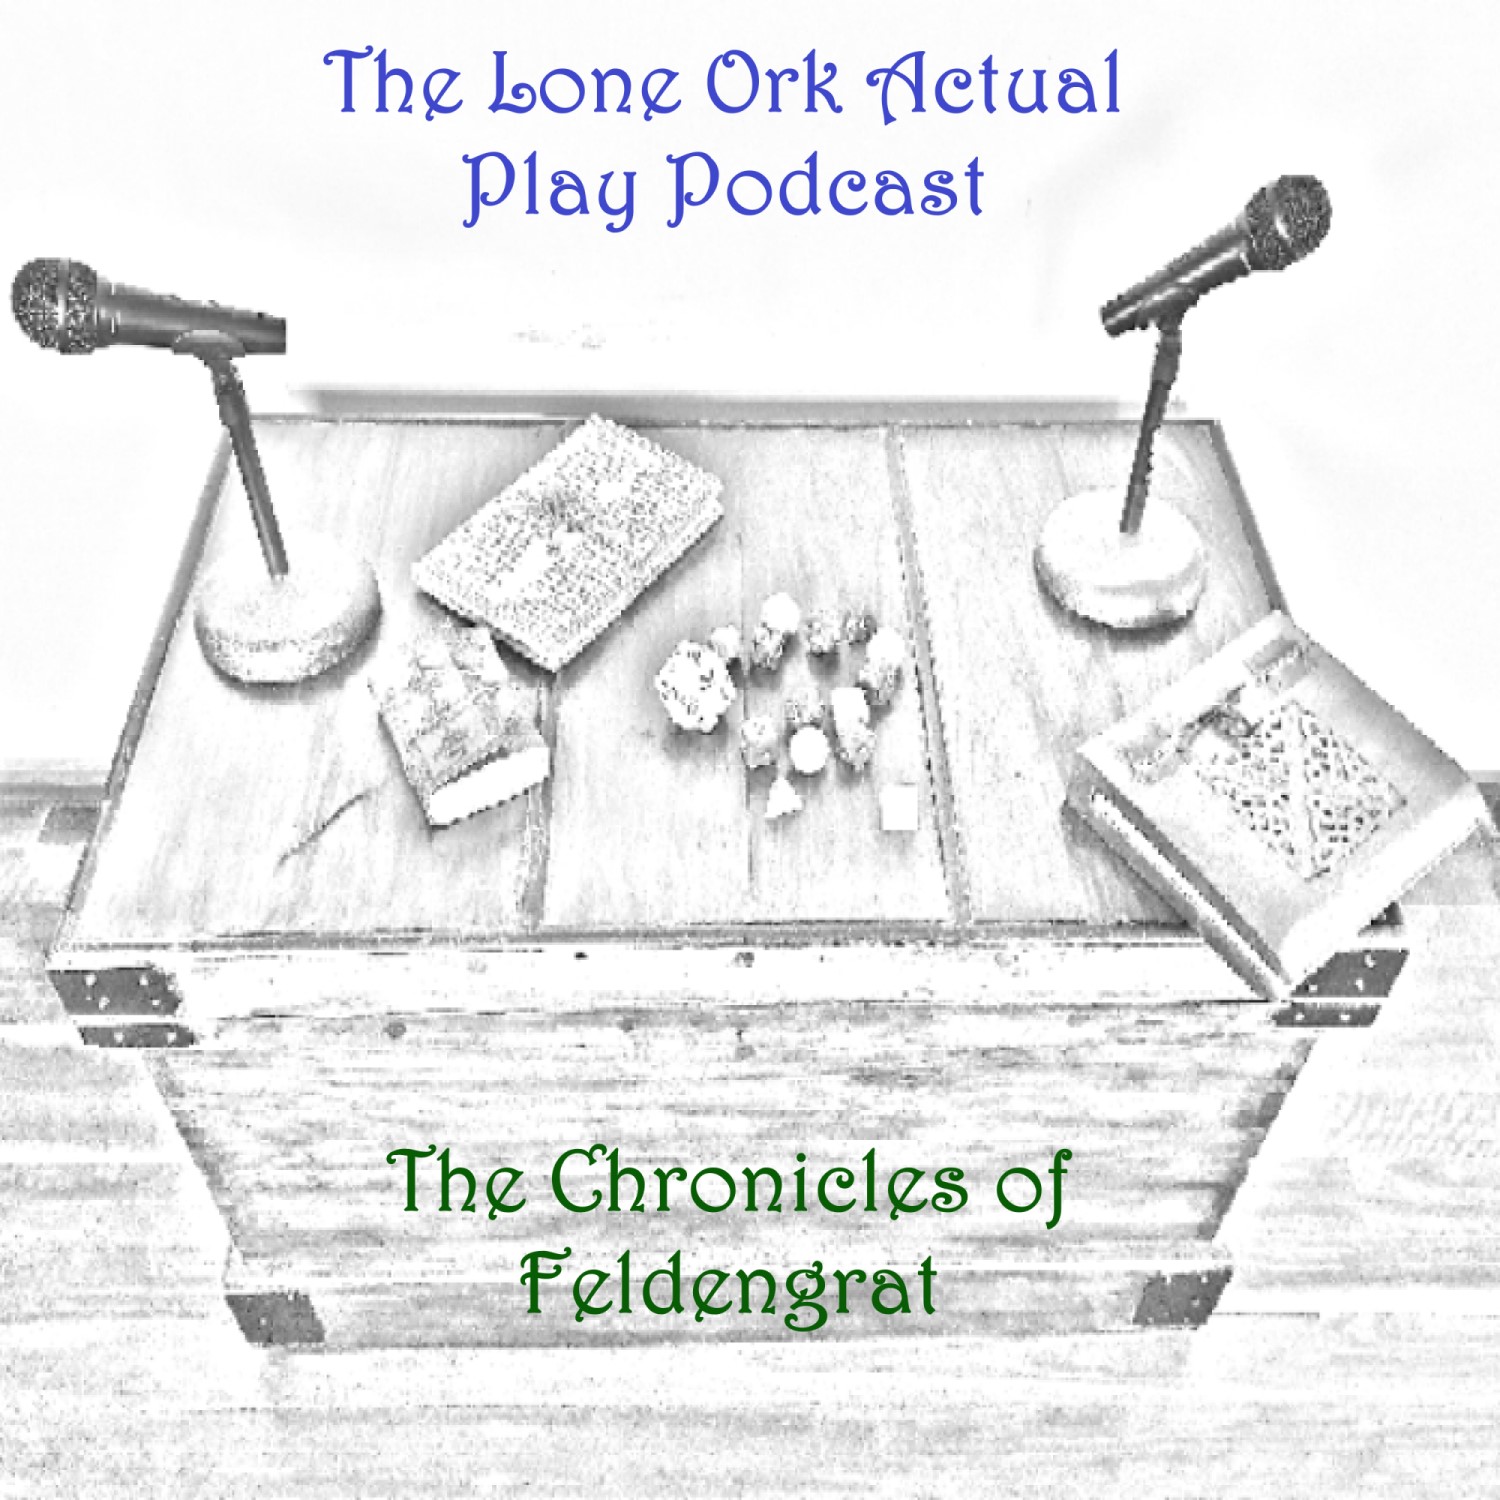 Artwork for podcast The Lone Ork Actual Play Podcast